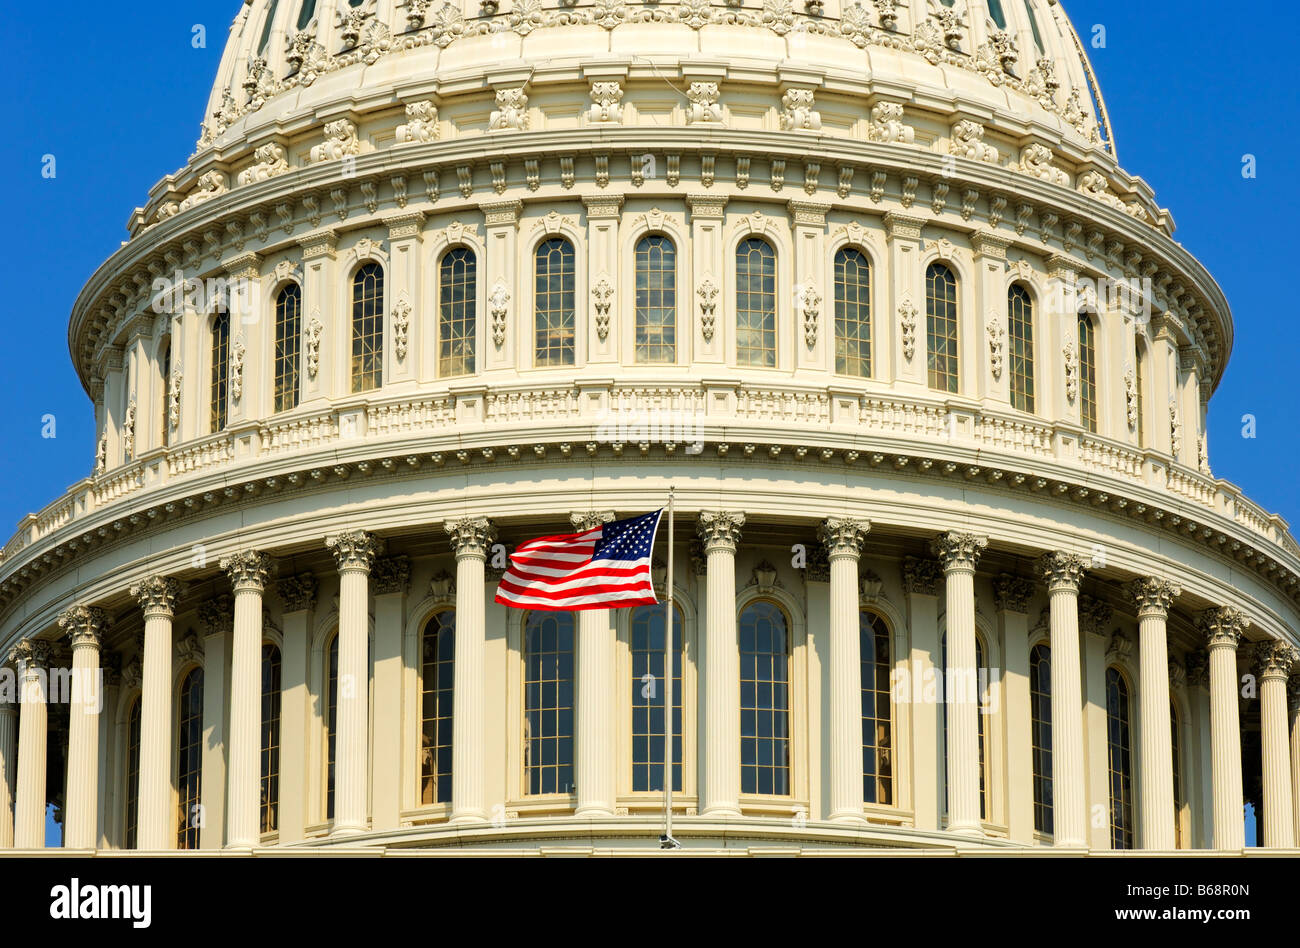 Detail of the central dome of the United States Capitol with the Stars and Strips flag, Washington, DC., USA Stock Photo